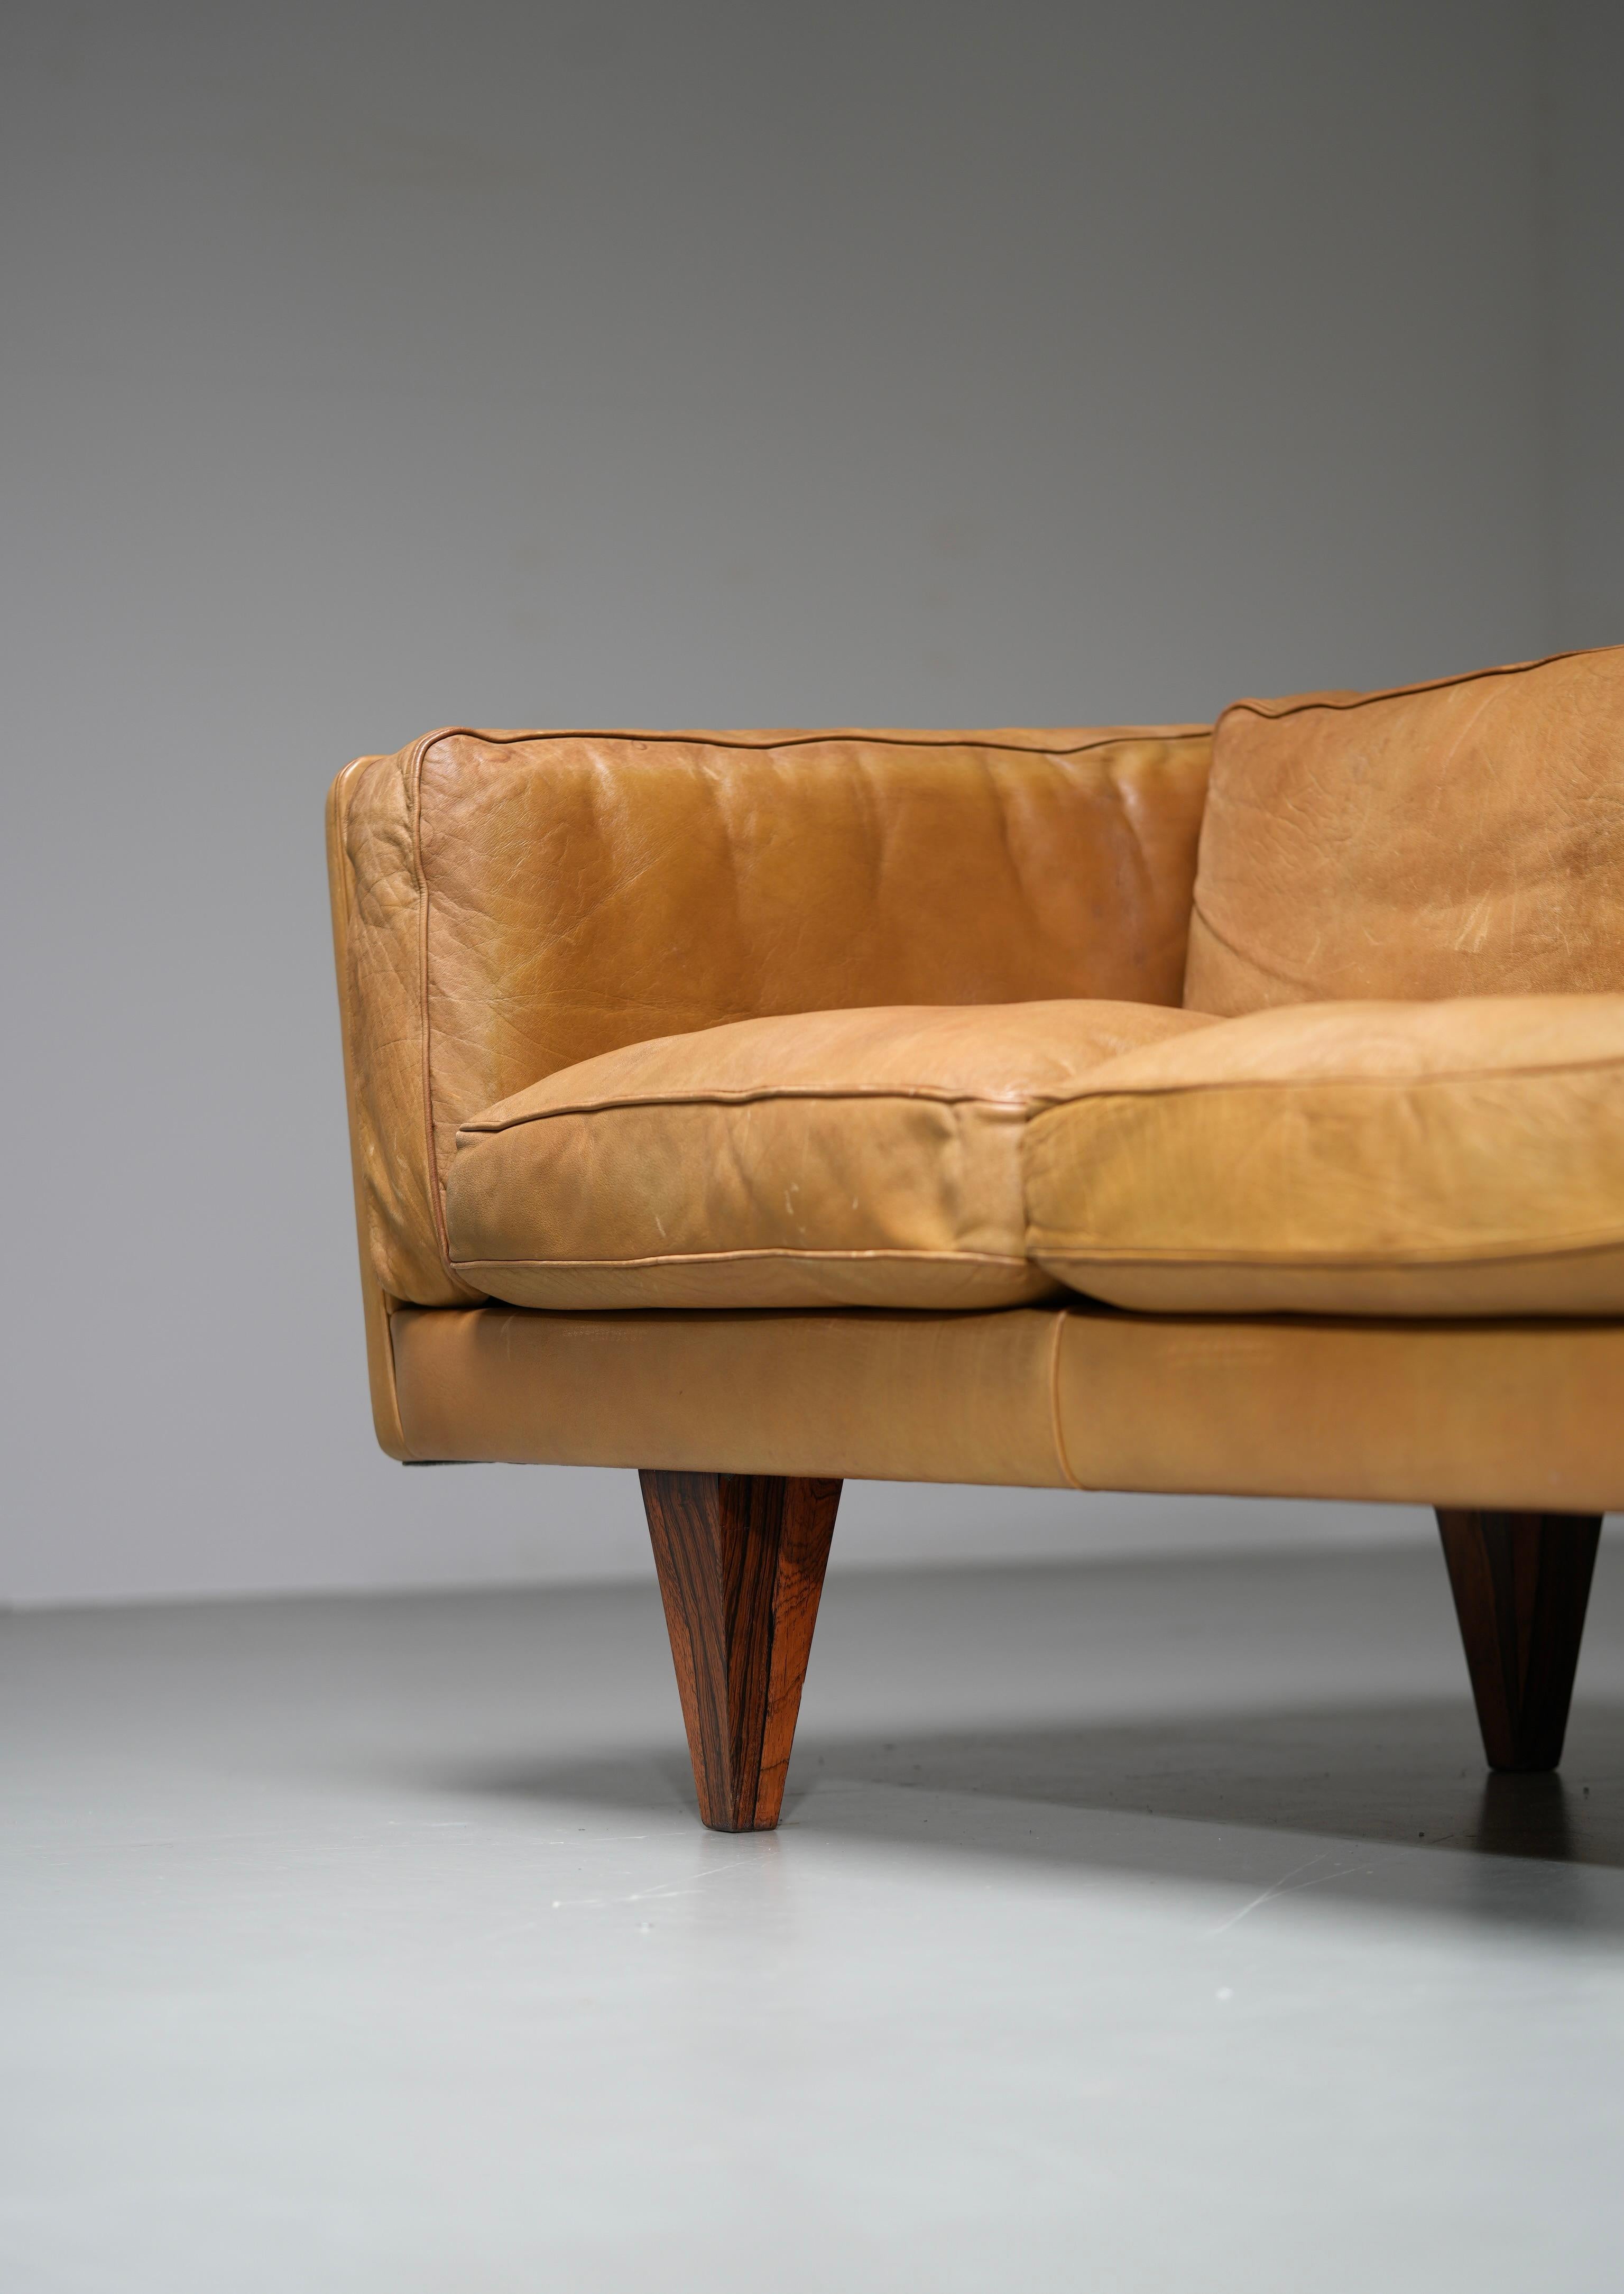 Illum Wikkelsø Three-Seat ‘V11’ Sofa in Cognac Leather, Denmark, 1960s In Good Condition For Sale In Uithoorn, NL